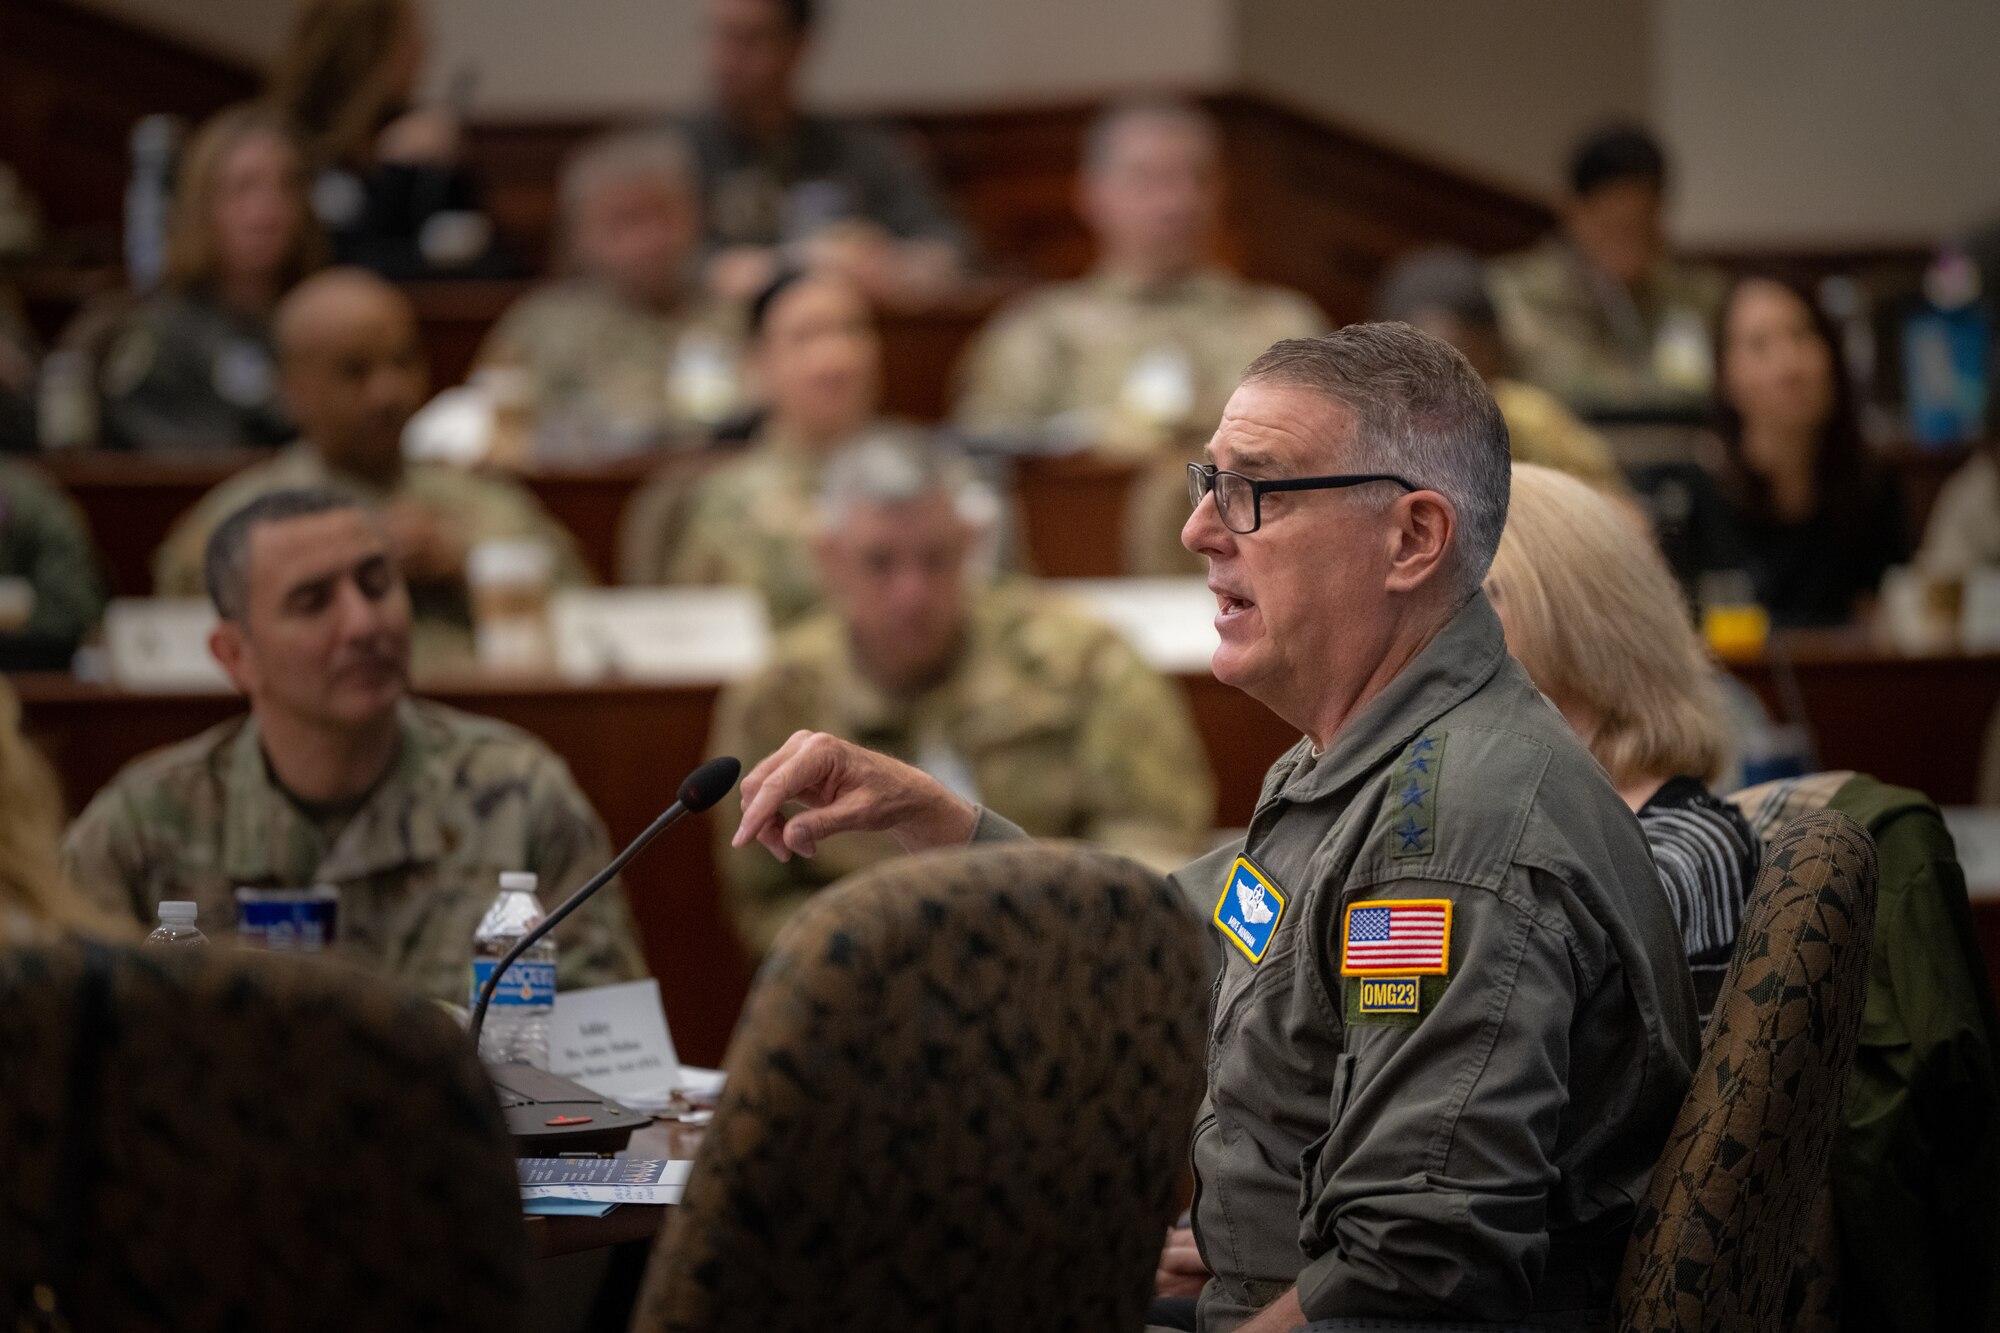 U.S. Air Force Gen. Mike Minihan, commander of Air Mobility Command, answers questions during the Phoenix Rally conference at MacDill Air Force Base, Florida, April 17, 2023. Spring Phoenix Rally brought together more than 250 Total Force Mobility Air Force leaders and spouses to discuss Warrior Heart, Mobility Guardian ’23, Air Mobility Command's strategy and priorities, and how to work together to ensure the Mobility Air Force is ready to deliver Rapid Global Mobility across the Joint Force. (U.S. Air Force photo by Airman 1st Class Zachary Foster)